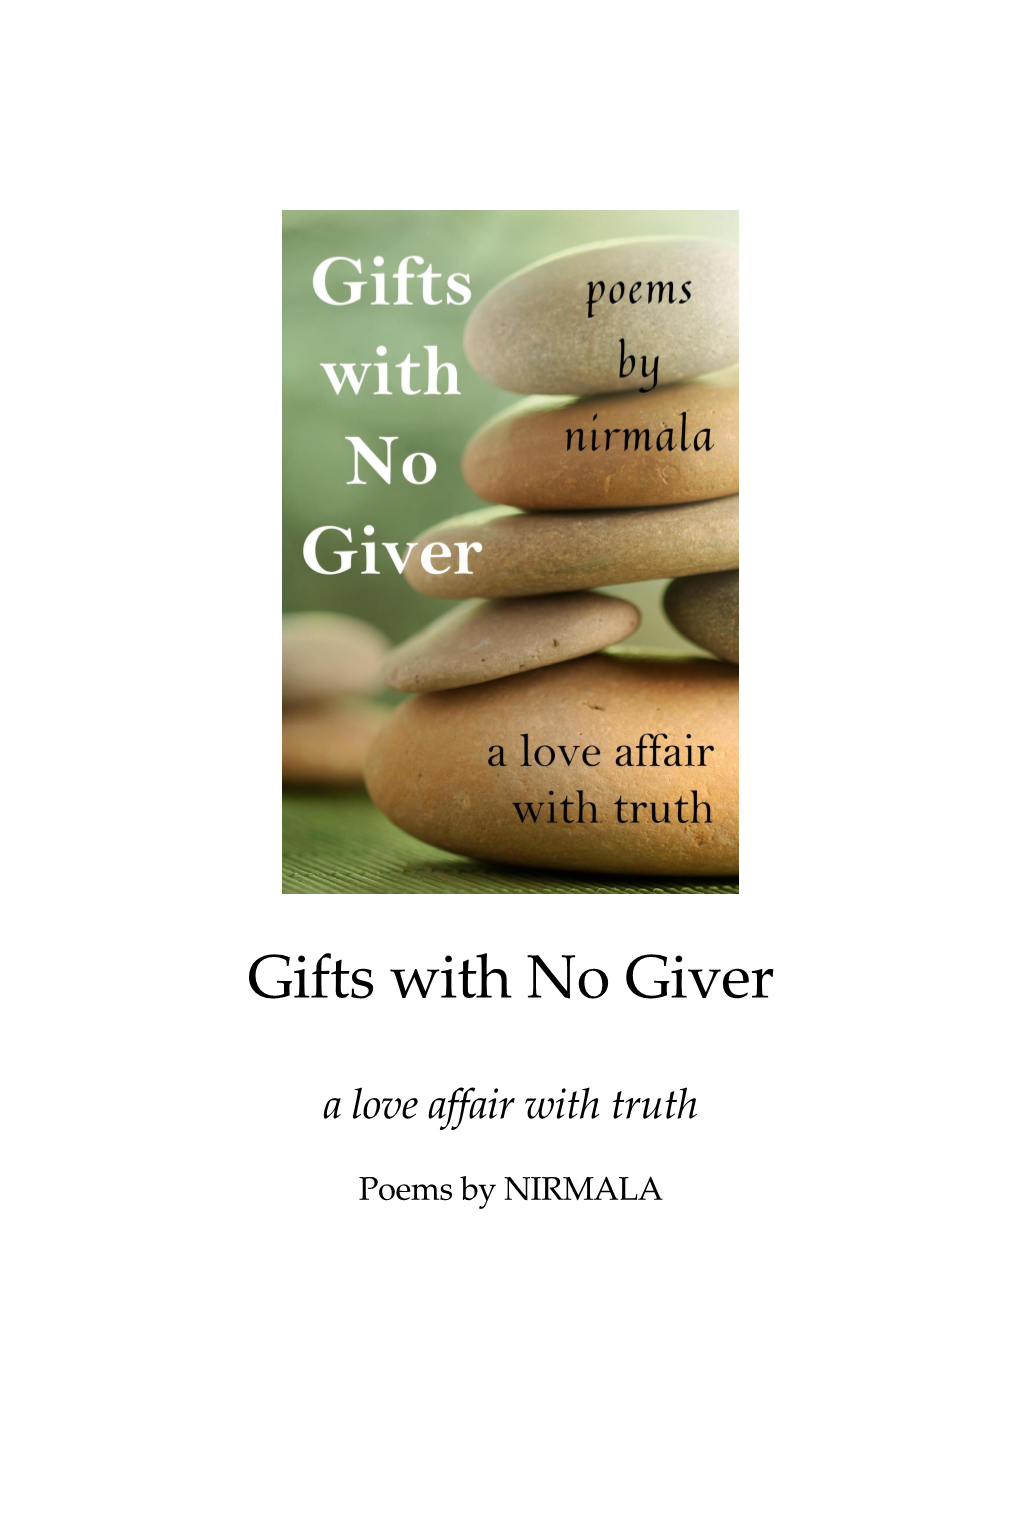 Gifts with No Giver